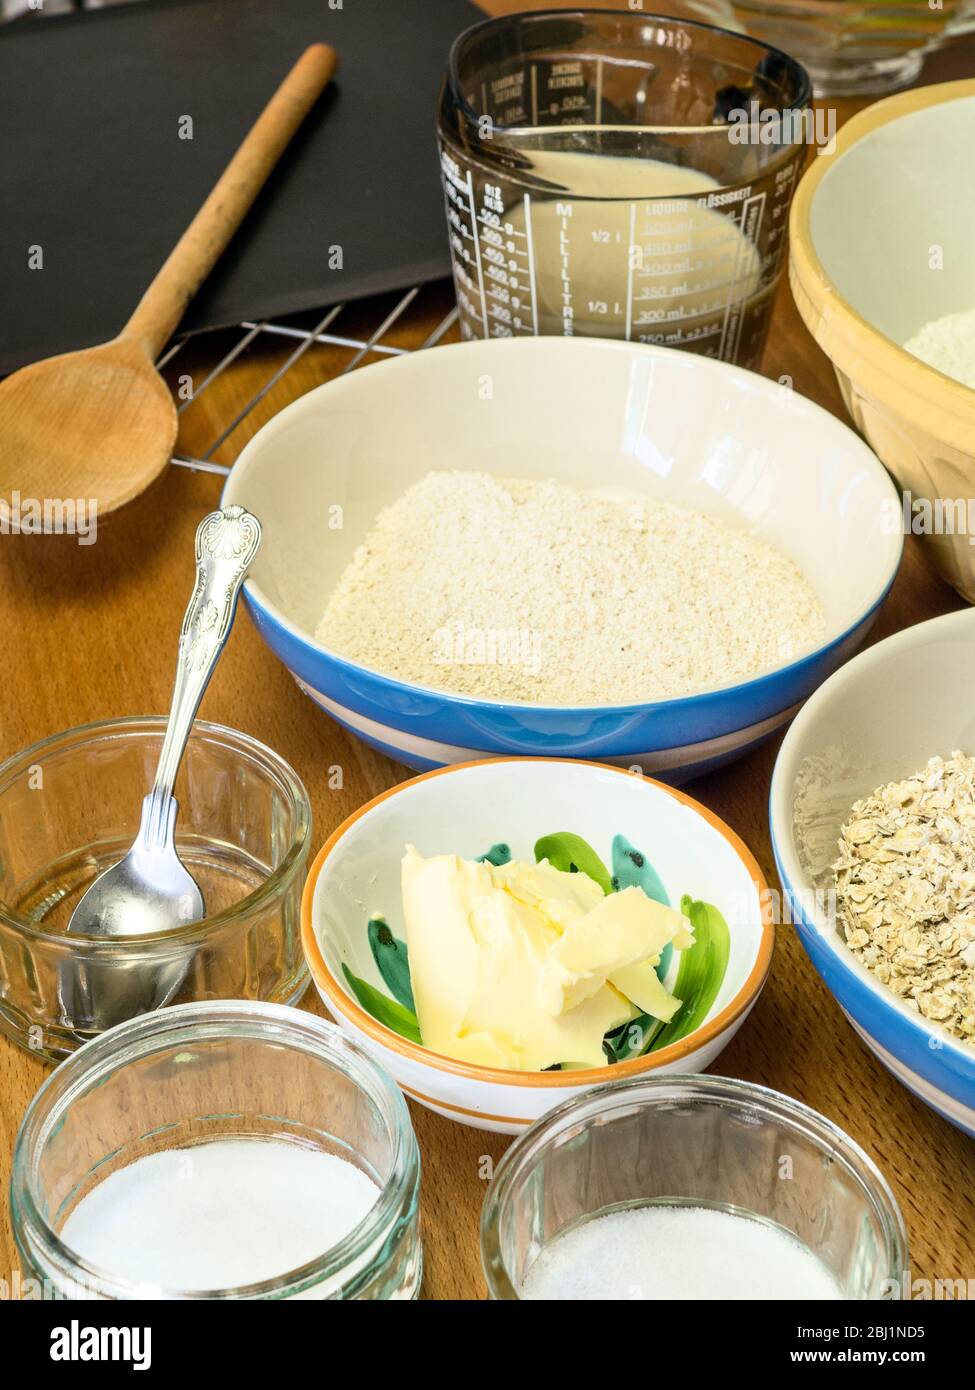 Ingredients for making oat bread on a kitchen table Stock Photo